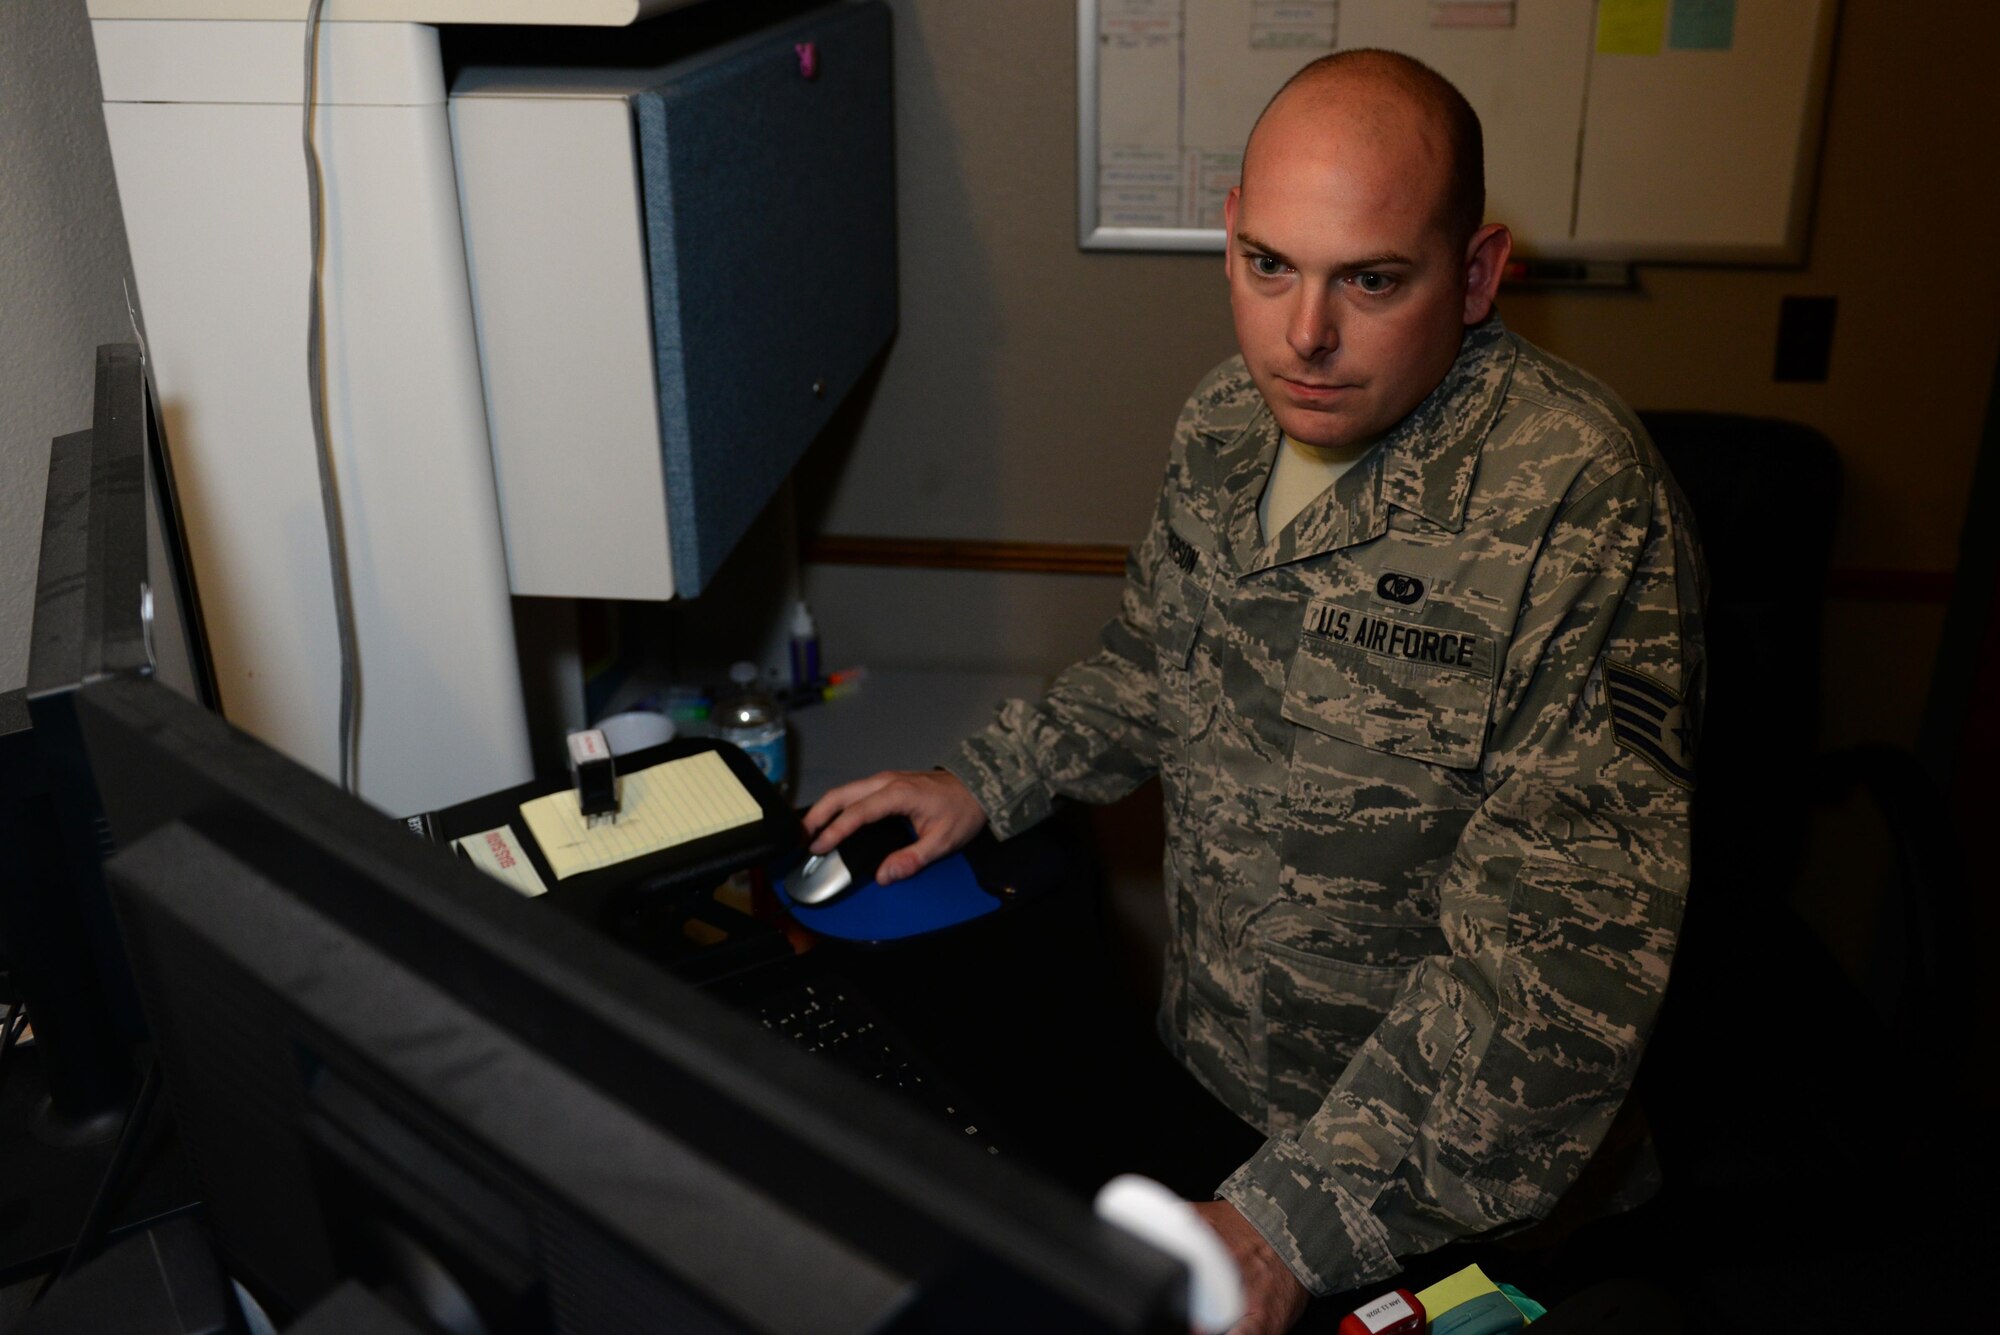 U.S. Air Force Staff Sgt. Nicholas Everson, 58th Airlift Squadron Aviation Recourse Management journeyman, sets up flight orders for the next day’s flight, June 1, 2017, at Altus Air Force Base, Oklahoma. The SARM office is in charge of approving the accuracy of flight scheduled personnel and documenting their flight records.